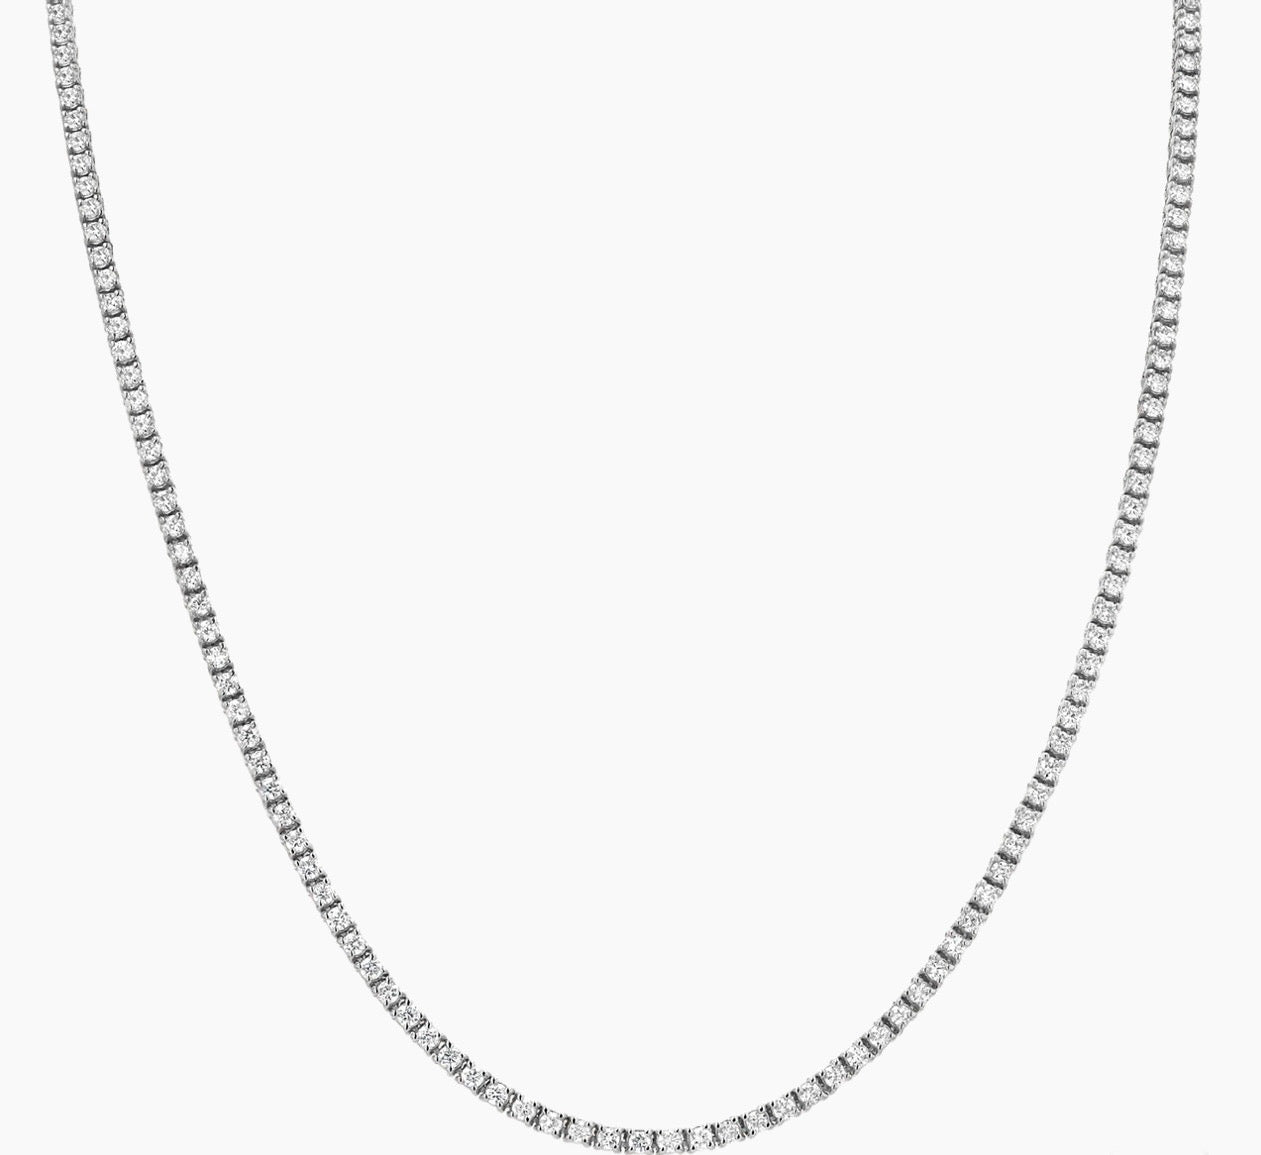 Etoile Crystal Tennis Necklace